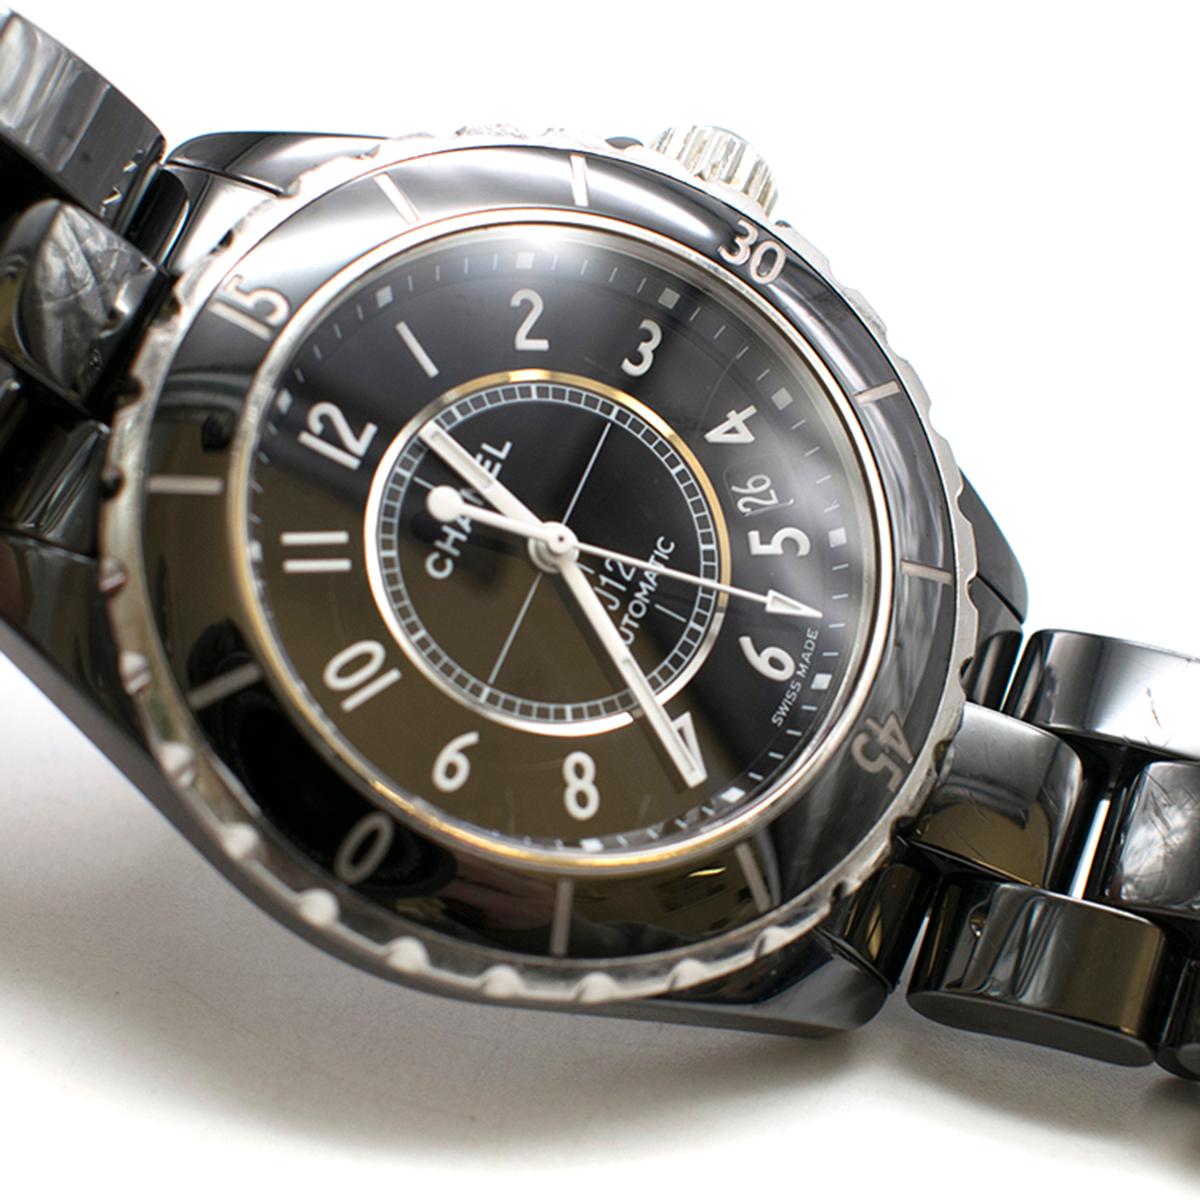 Chanel Black and Silver J12 Automatic Watch 2